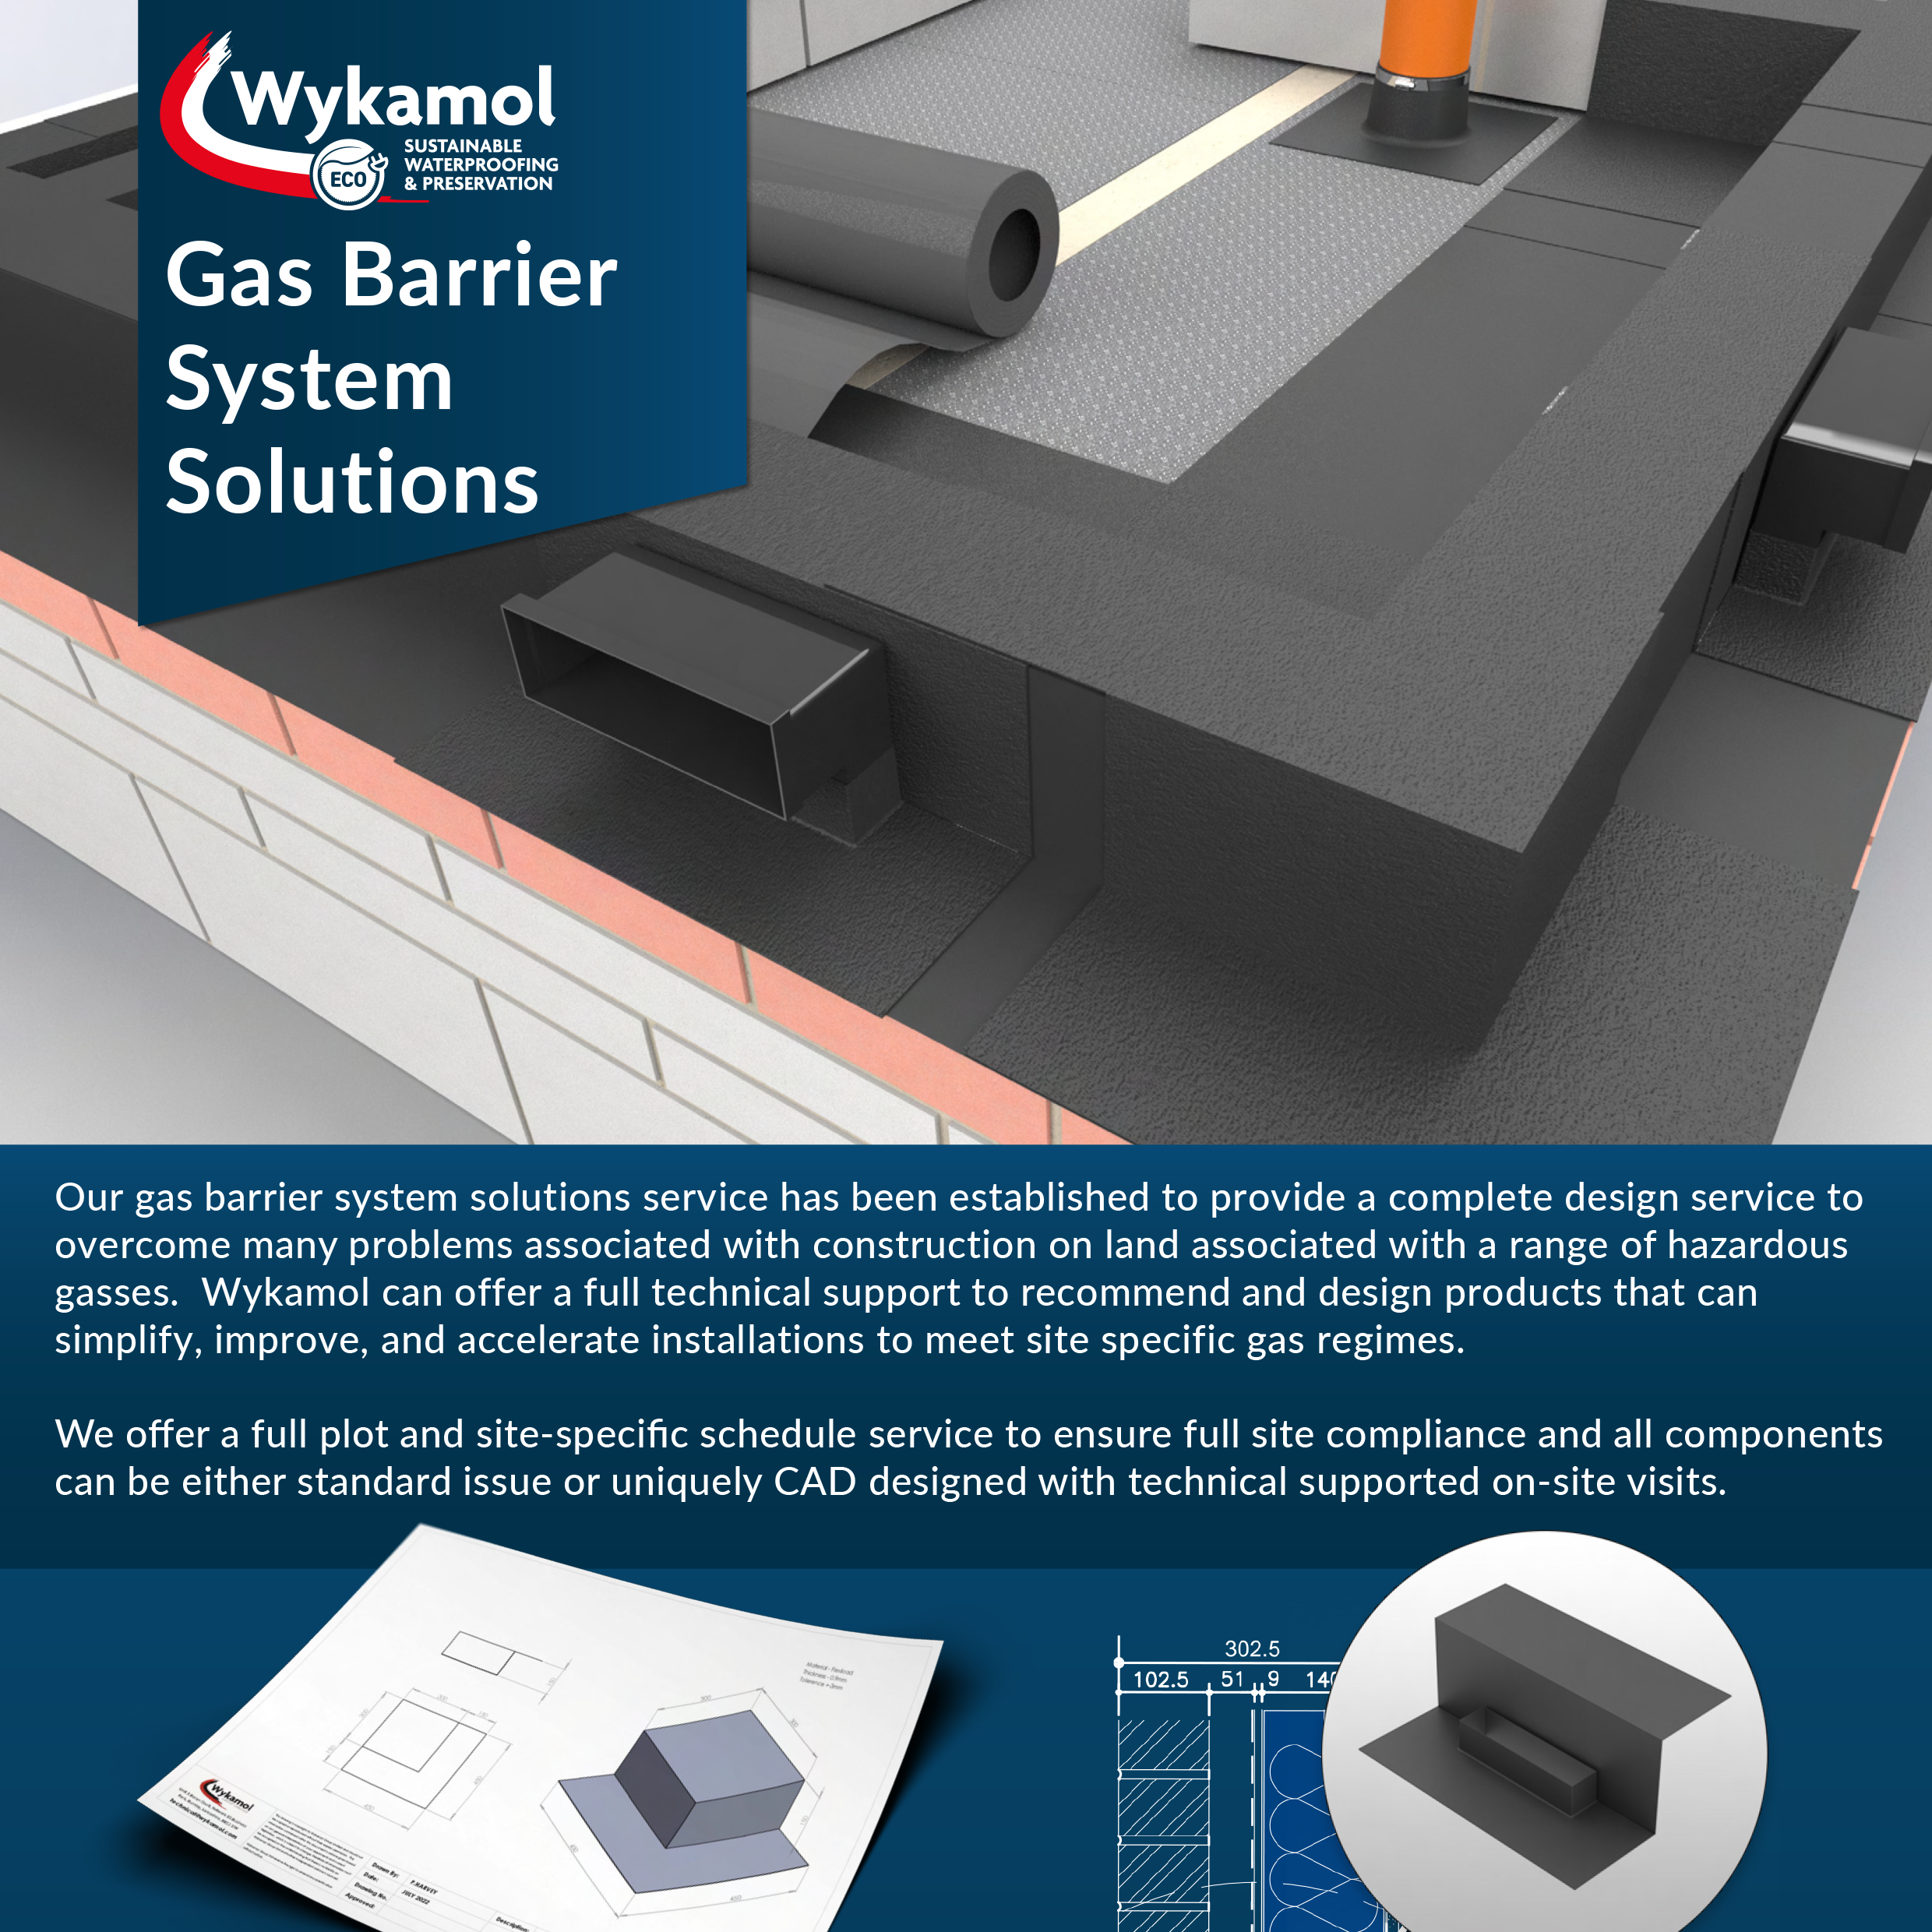 Gas Barrier System Solutions handout